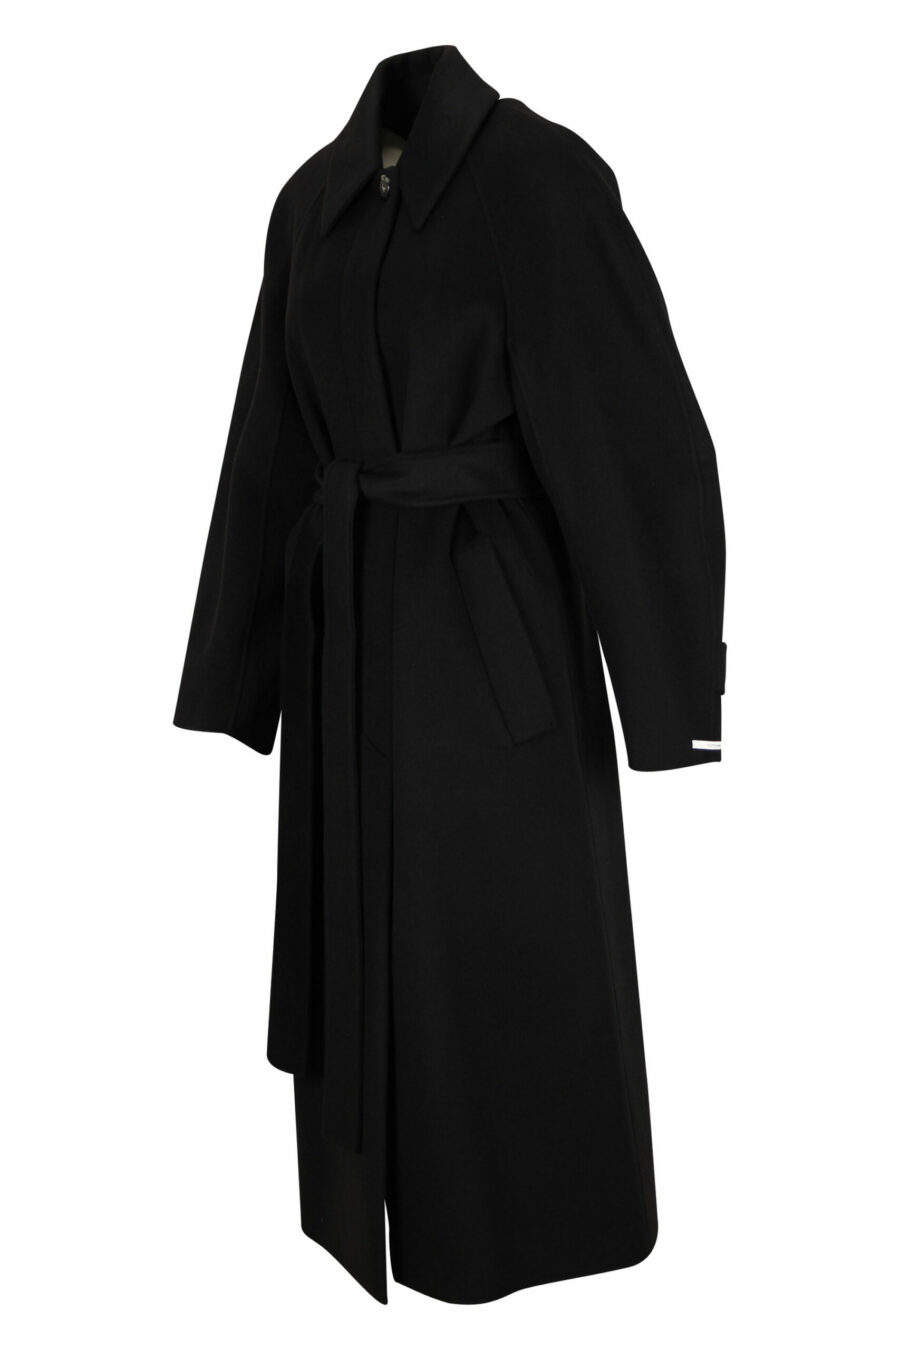 Long black wool and cashmere coat - 20110341060042 1 scaled